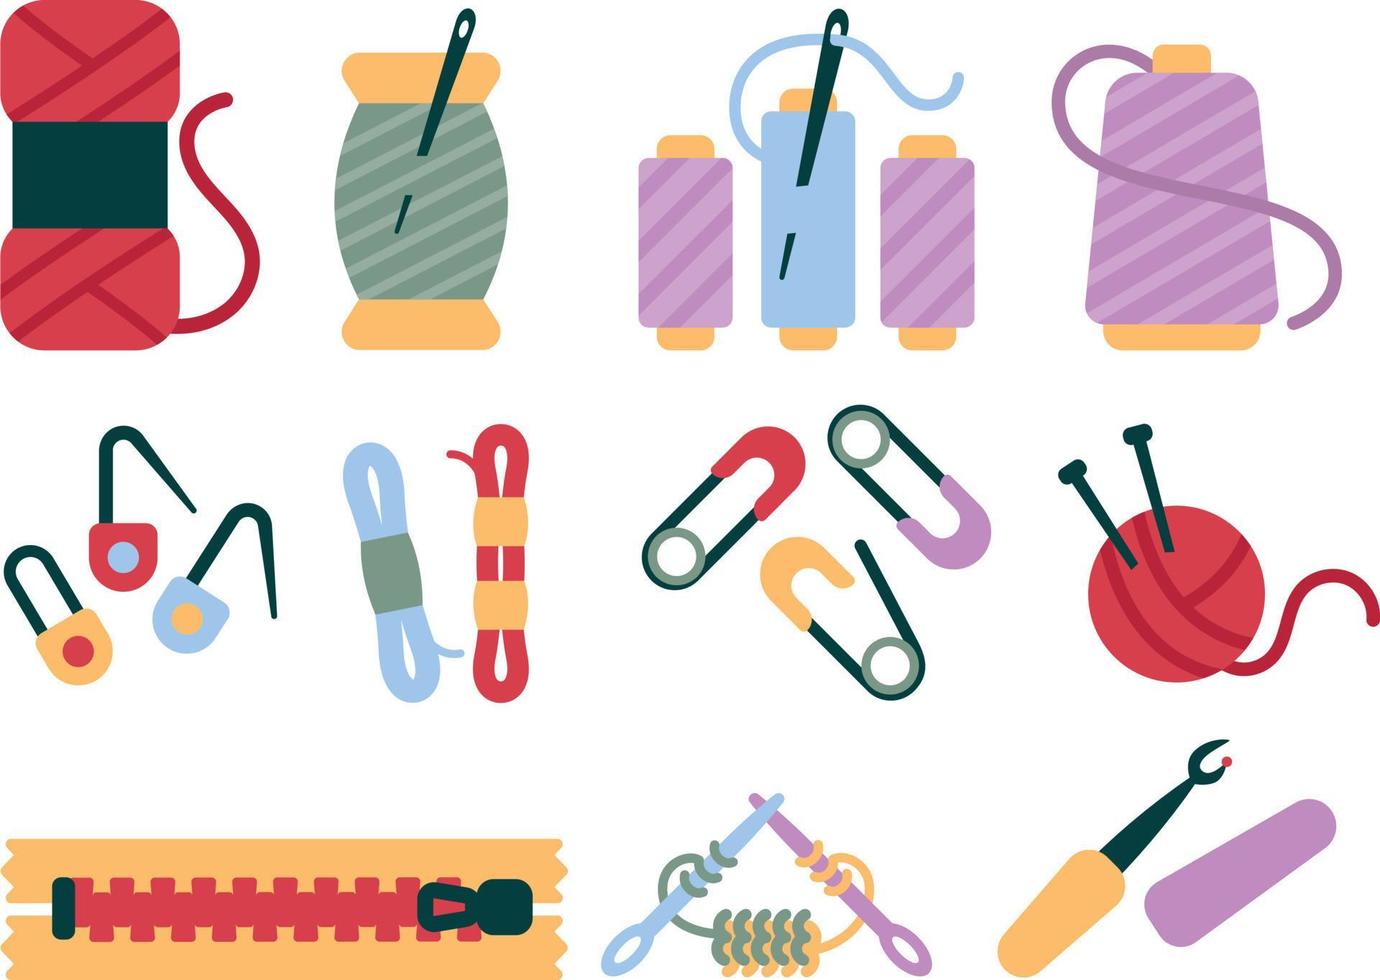 Sewing tools and accessories. Vector illustration in flat style.